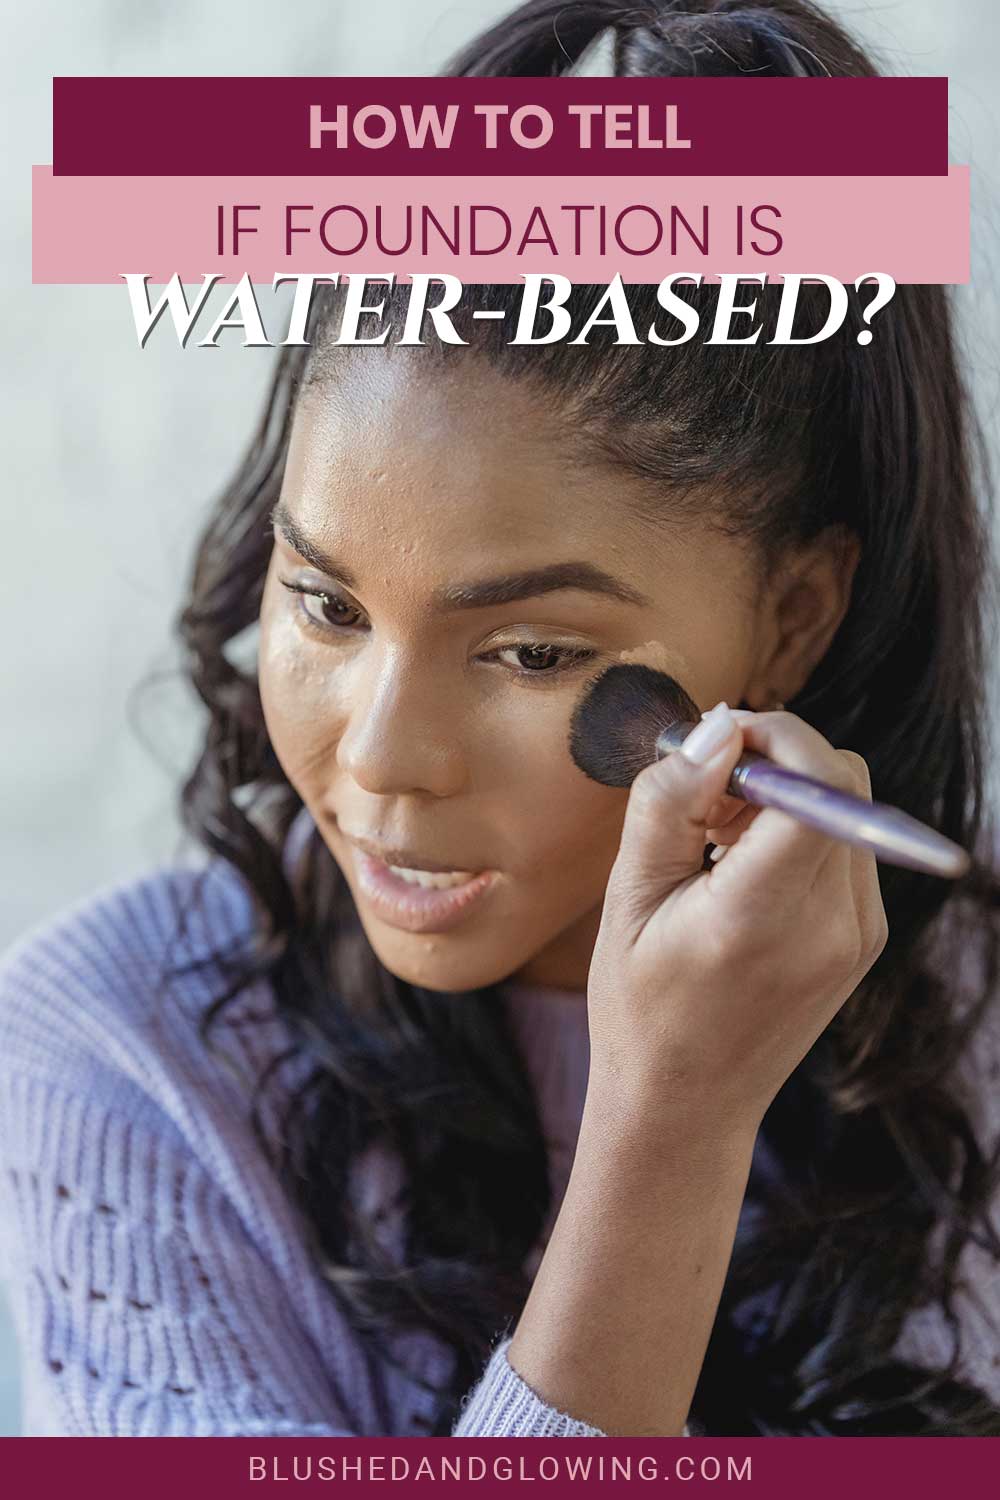 Girl applying foundation - How to tell if foundation is water-based?